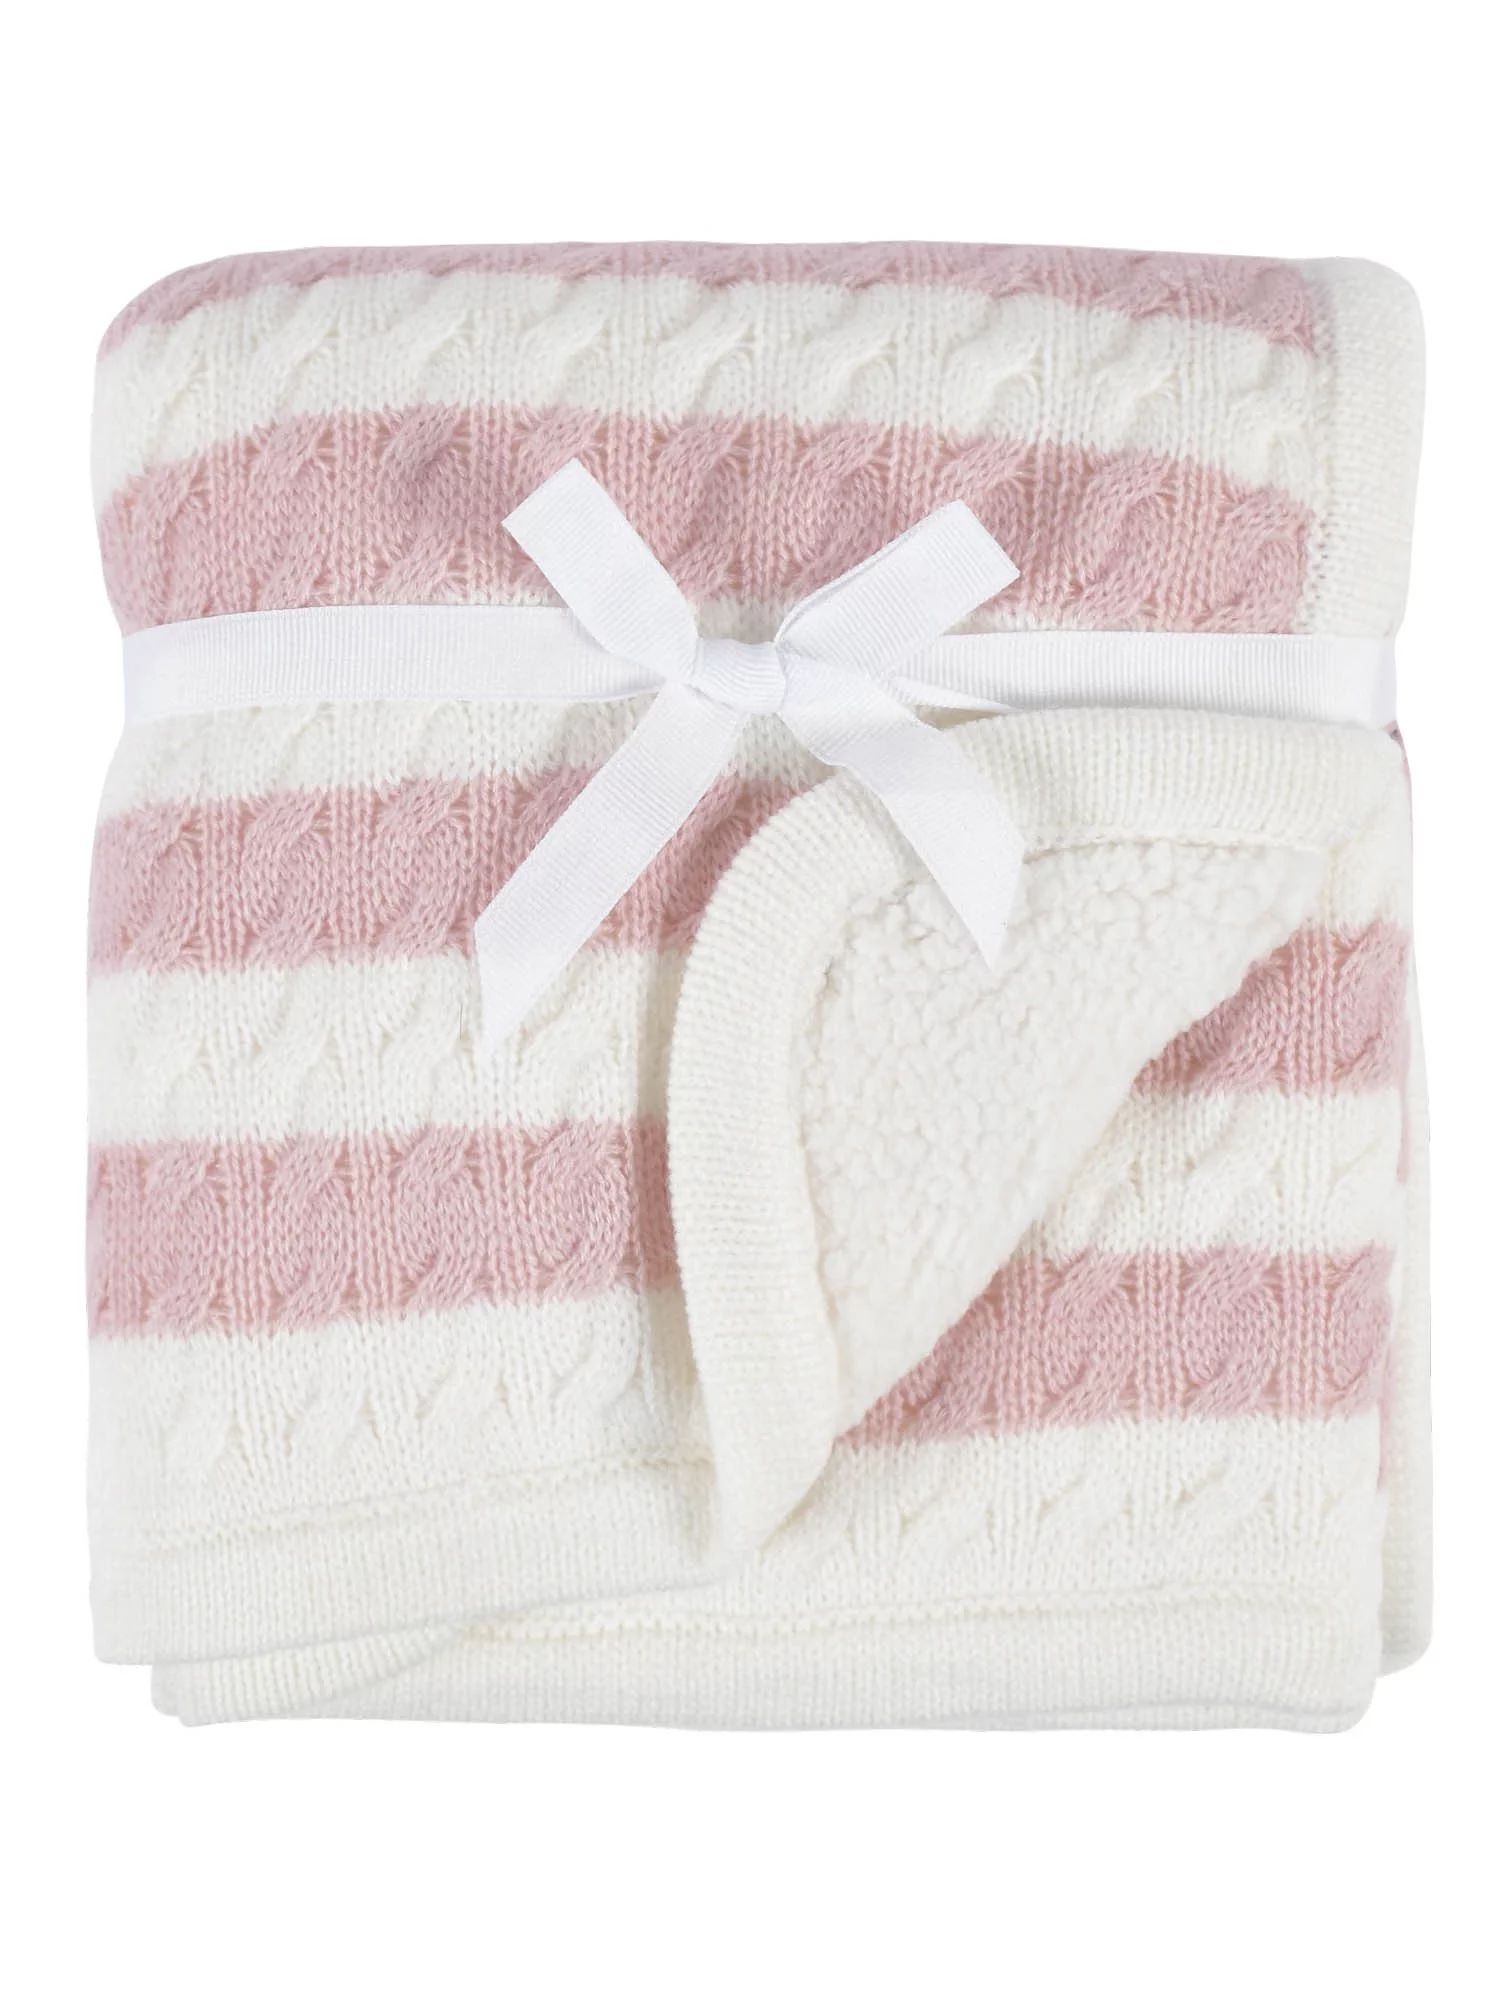 Modern Moments by Gerber Baby Boy or Girl Cable Knit Blanket with Sherpa, Pink Stripes | Walmart (US)